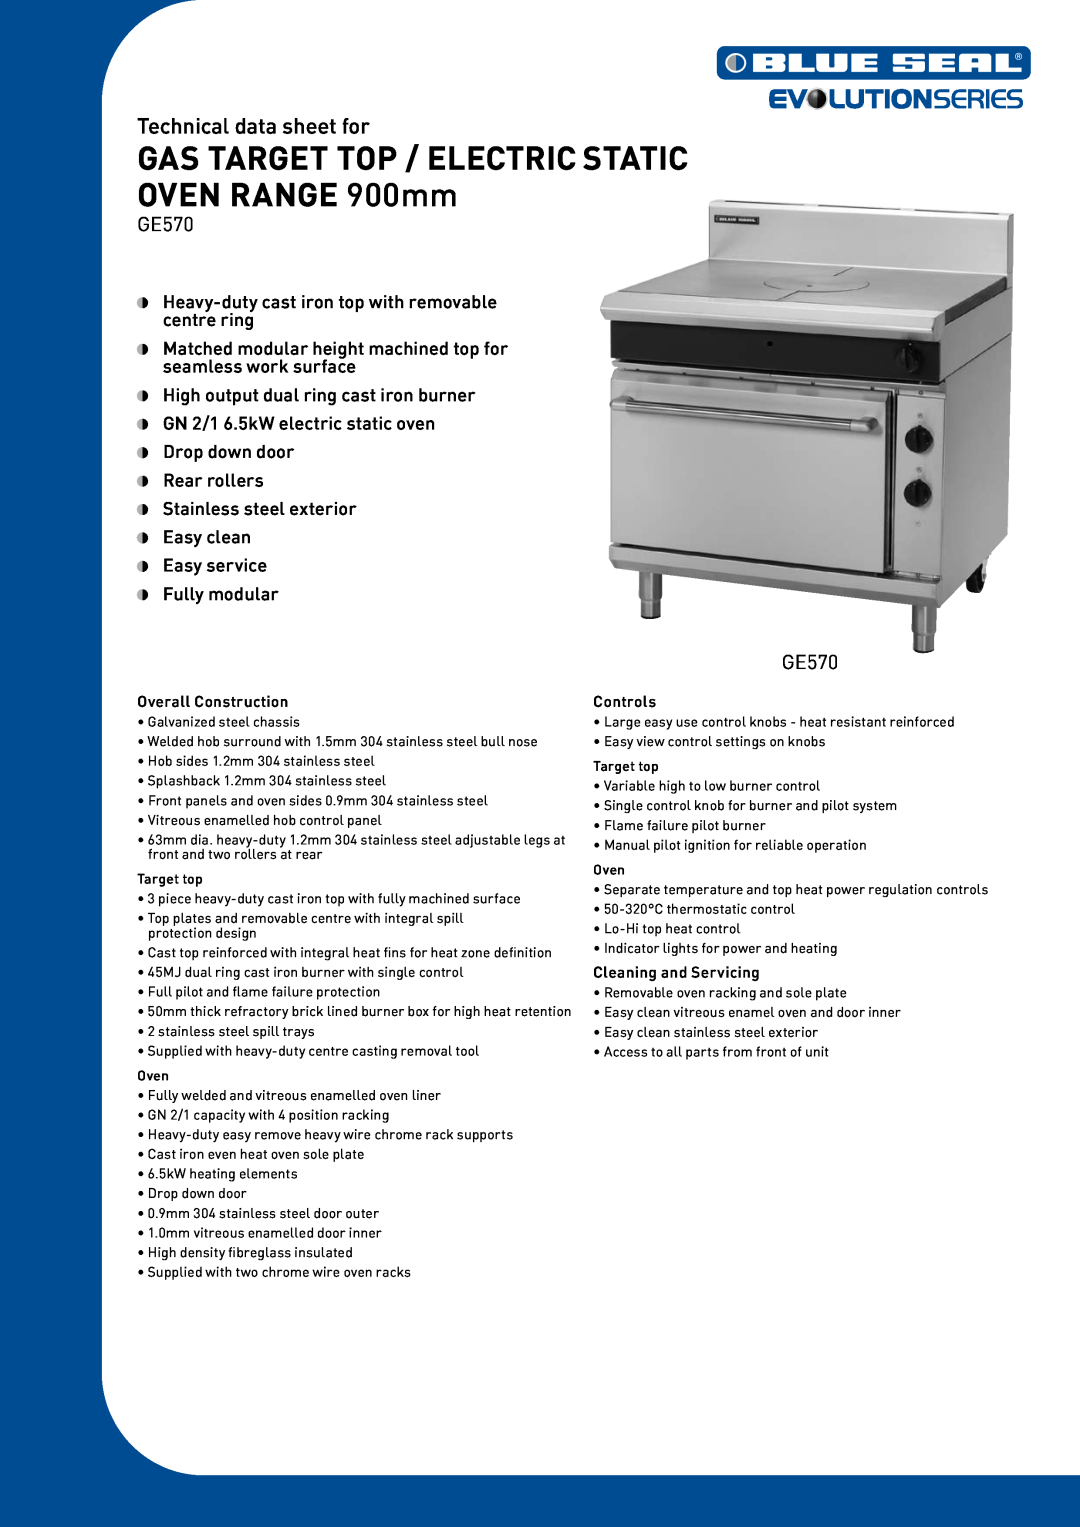 Moffat GE570 manual GAS TARGET TOP / ELECTRIC STATIC OVEN RANGE 900mm, Technical data sheet for, Overall Construction 